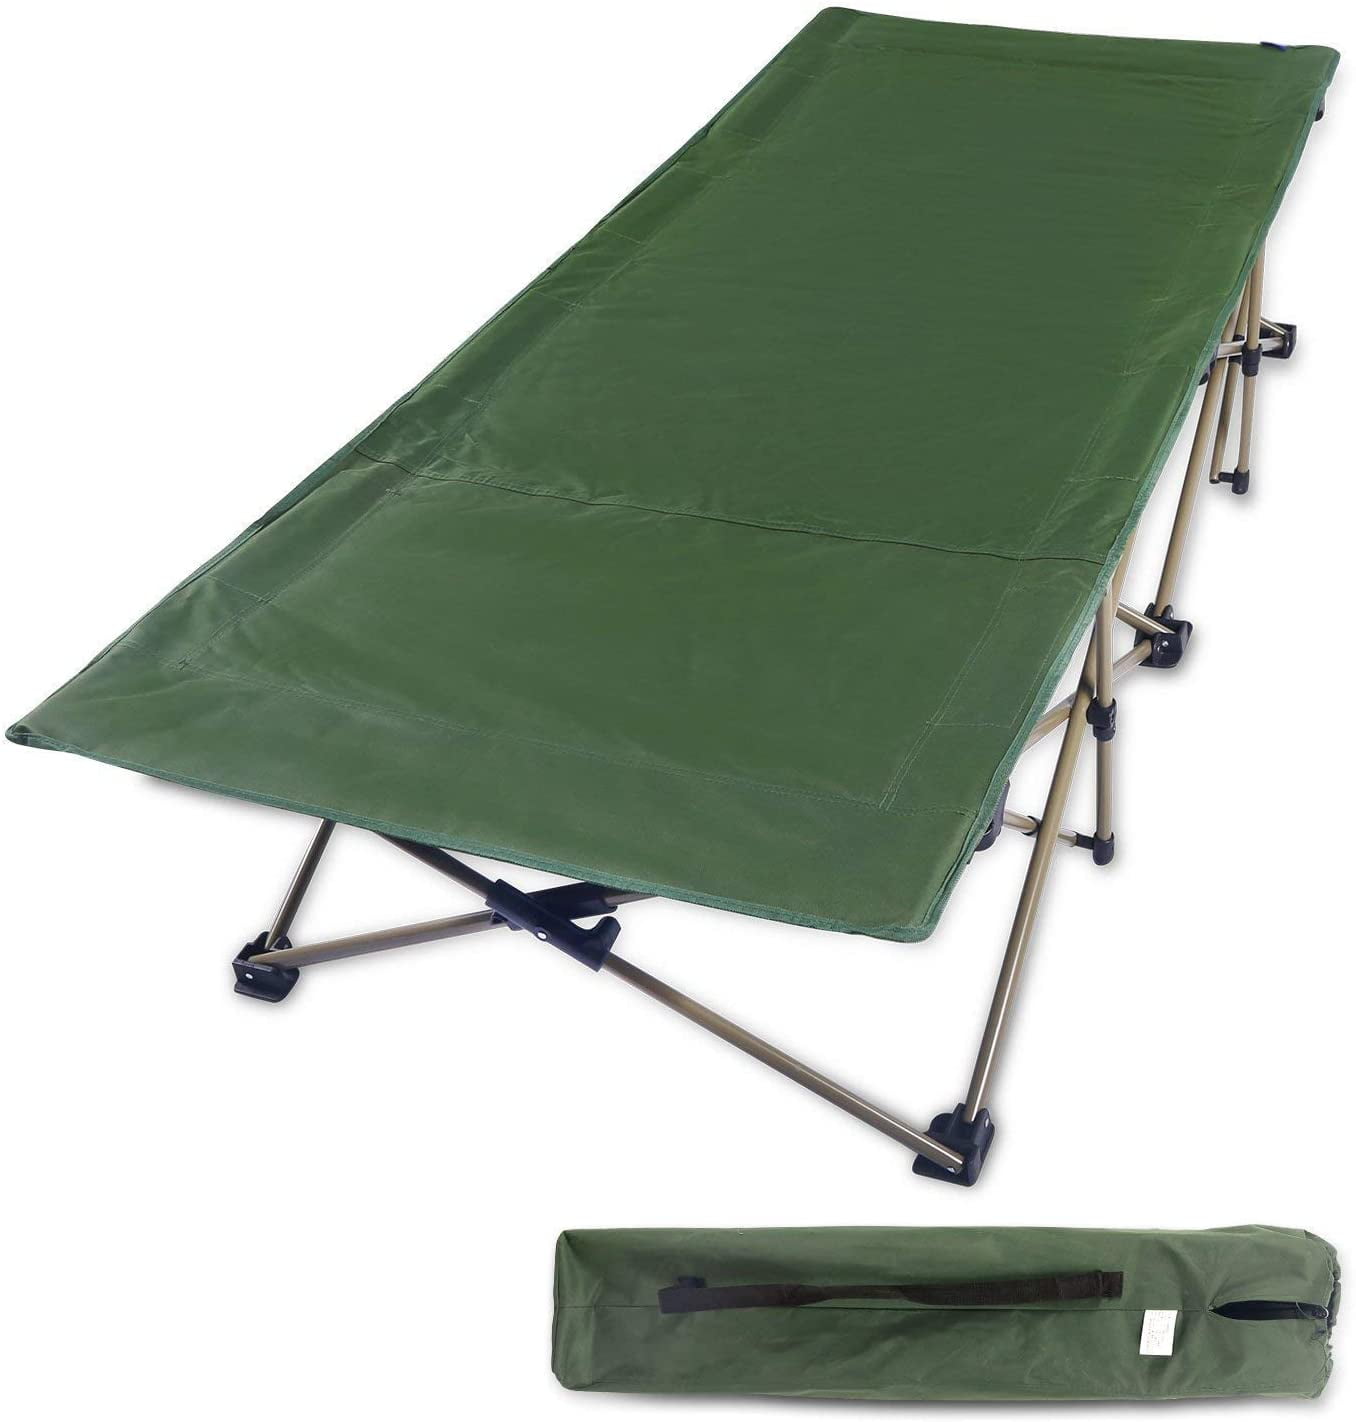 28-33 Extra Wide Sturdy Portable Sleeping Cot for Camp Office Use REDCAMP Folding Camping Cots for Adults Heavy Duty Blue Gray Green 